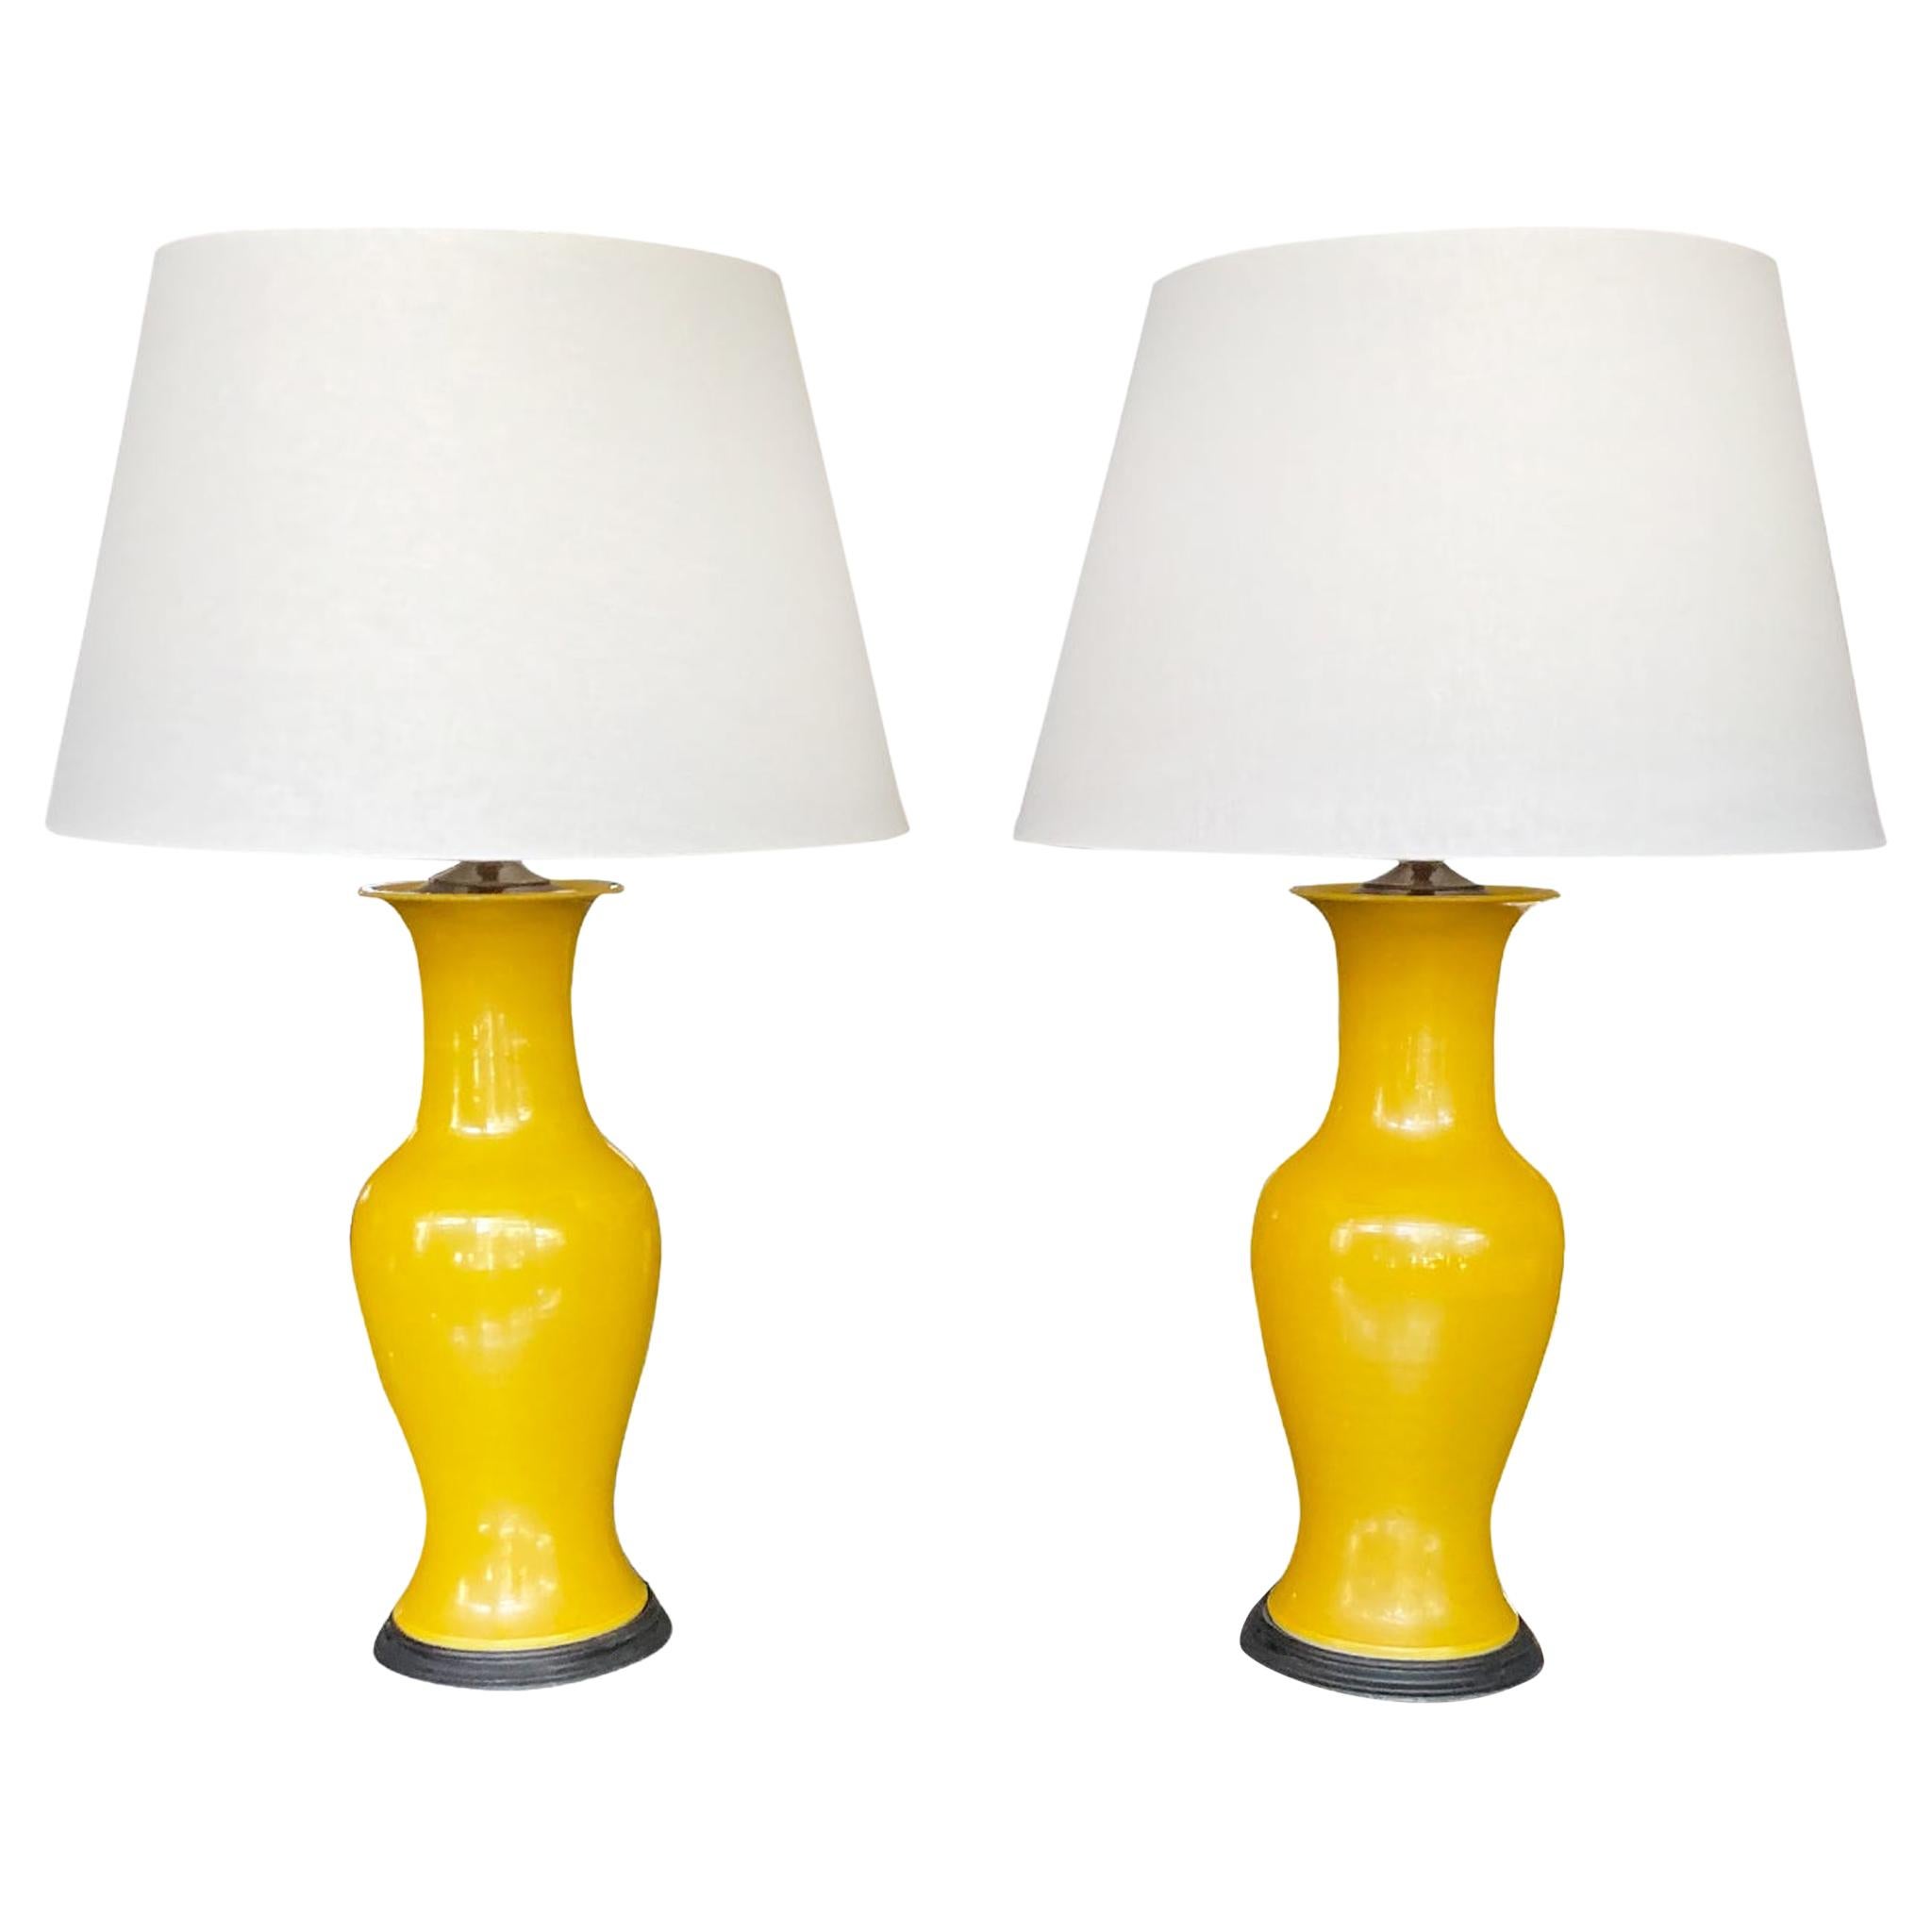 Pair of Mid-20th Century Chinese Yellow Vase Lamps